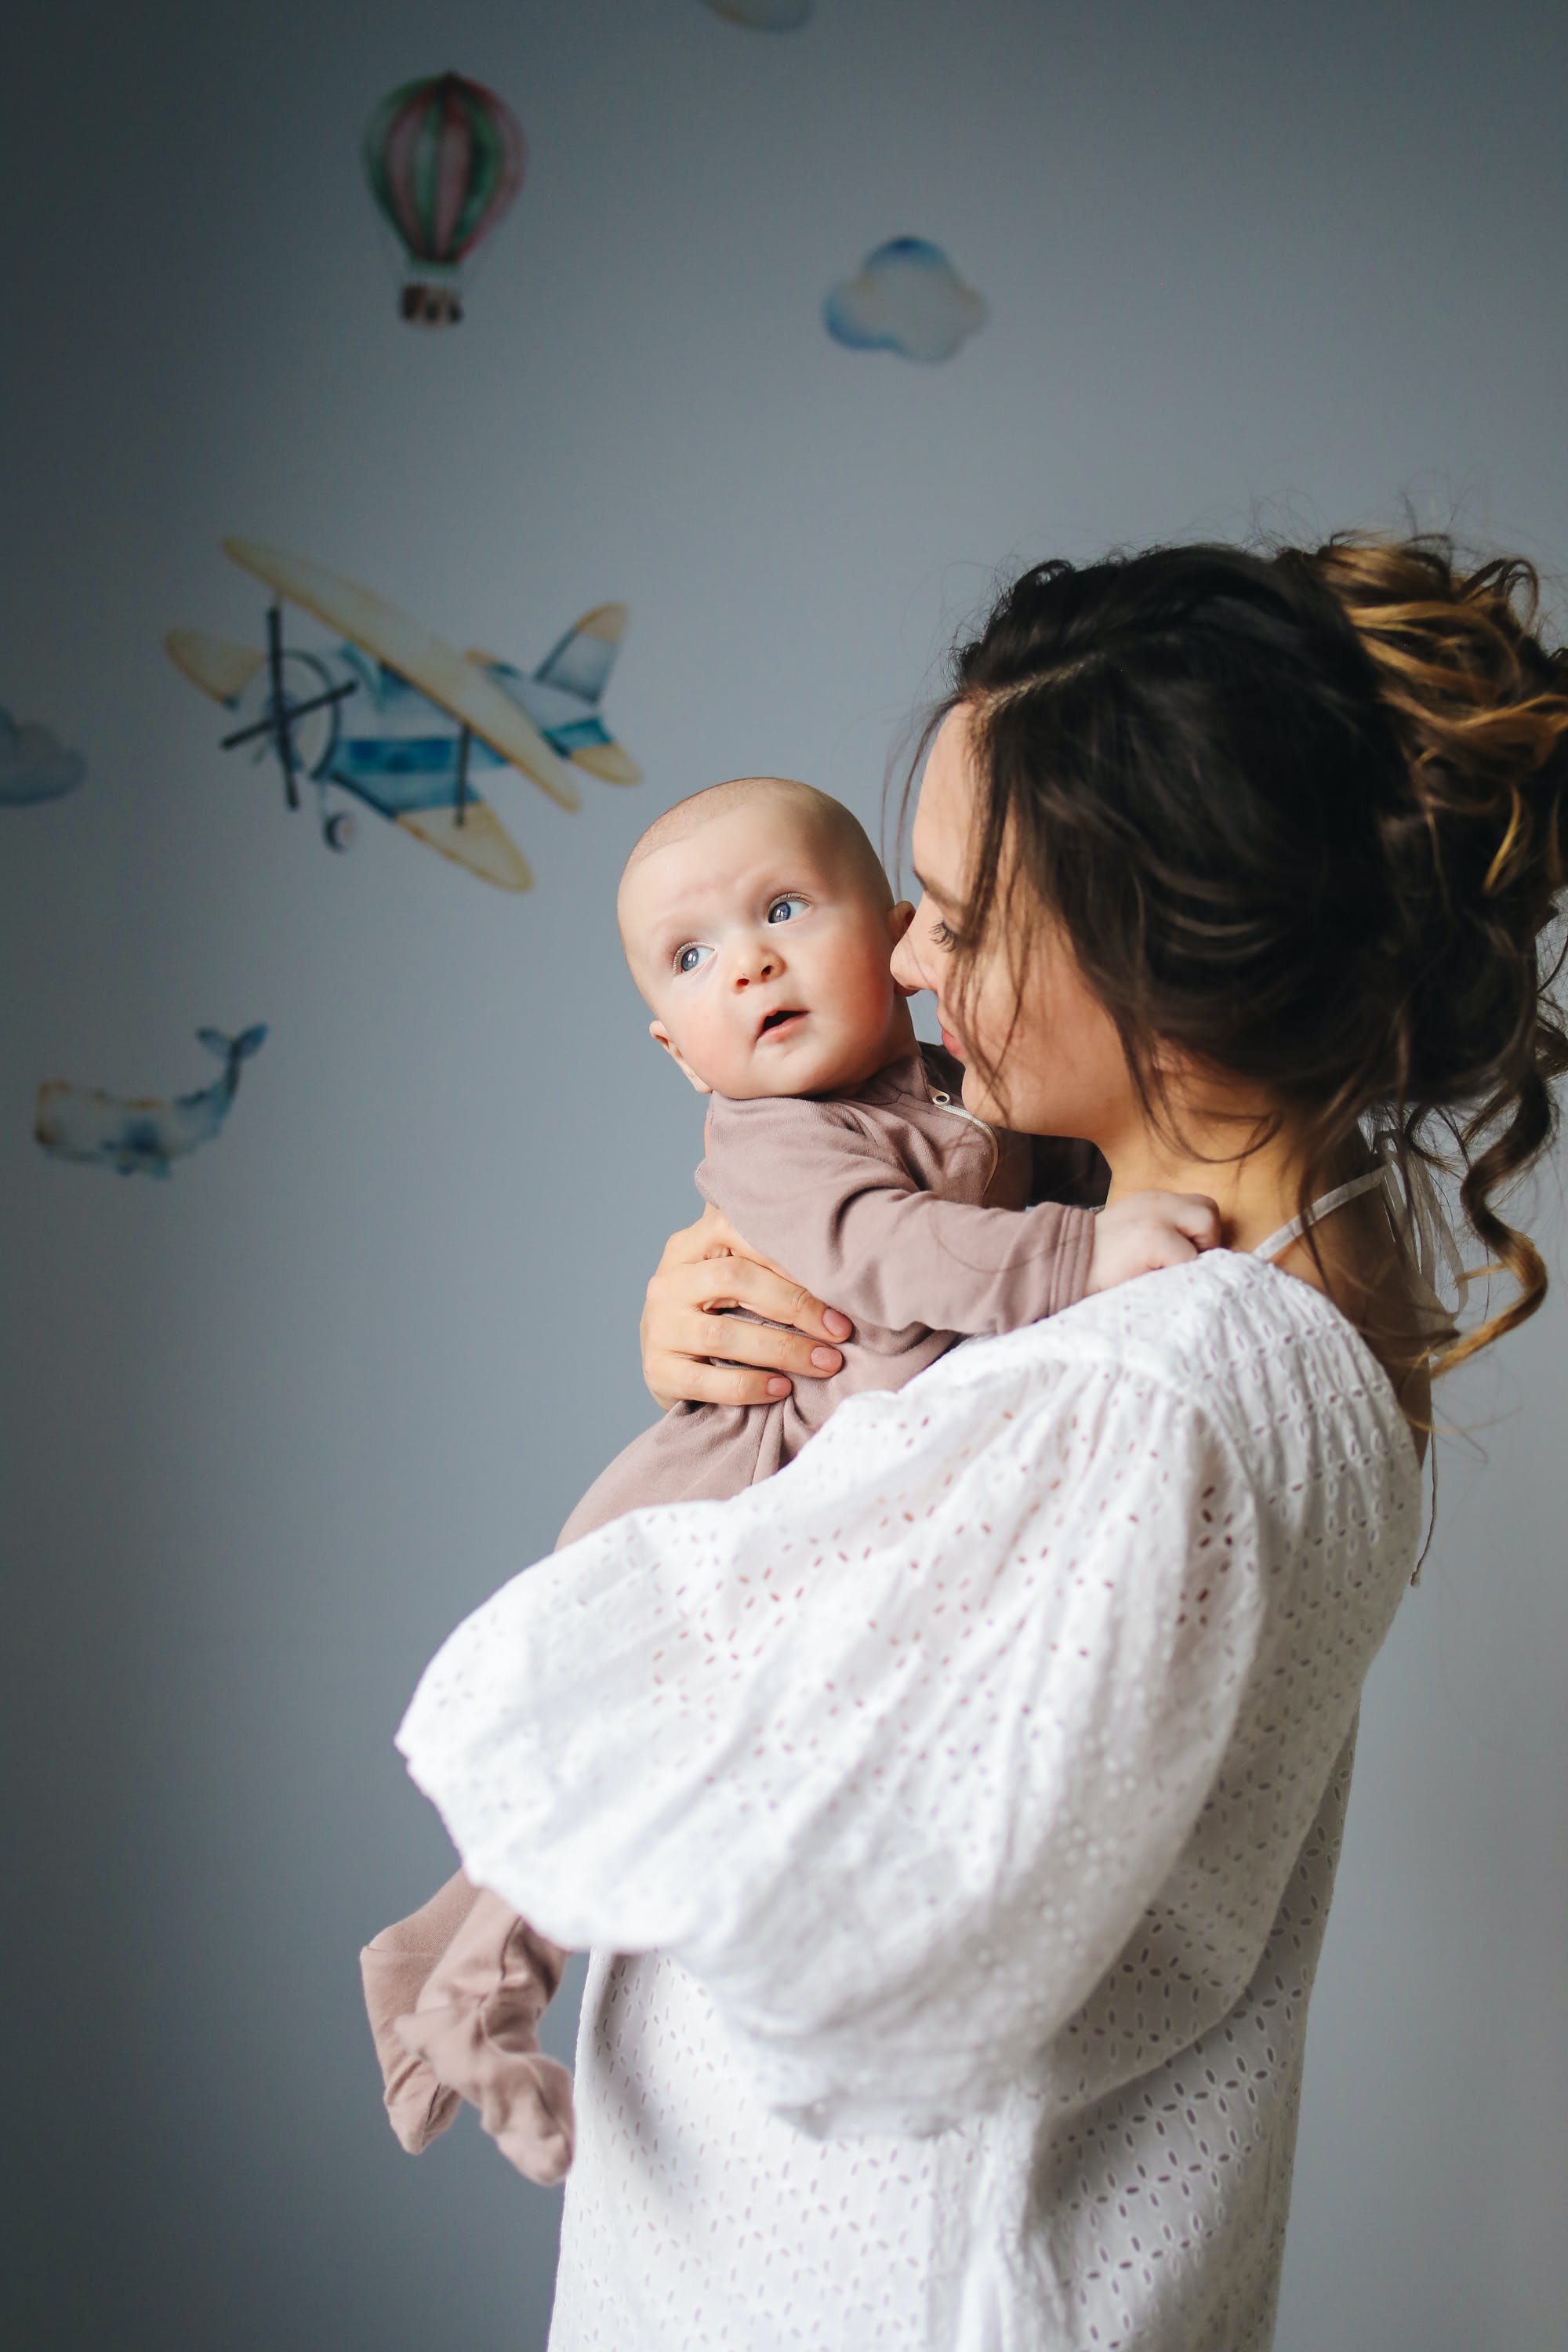 A mother holding a baby | Source: Pexels